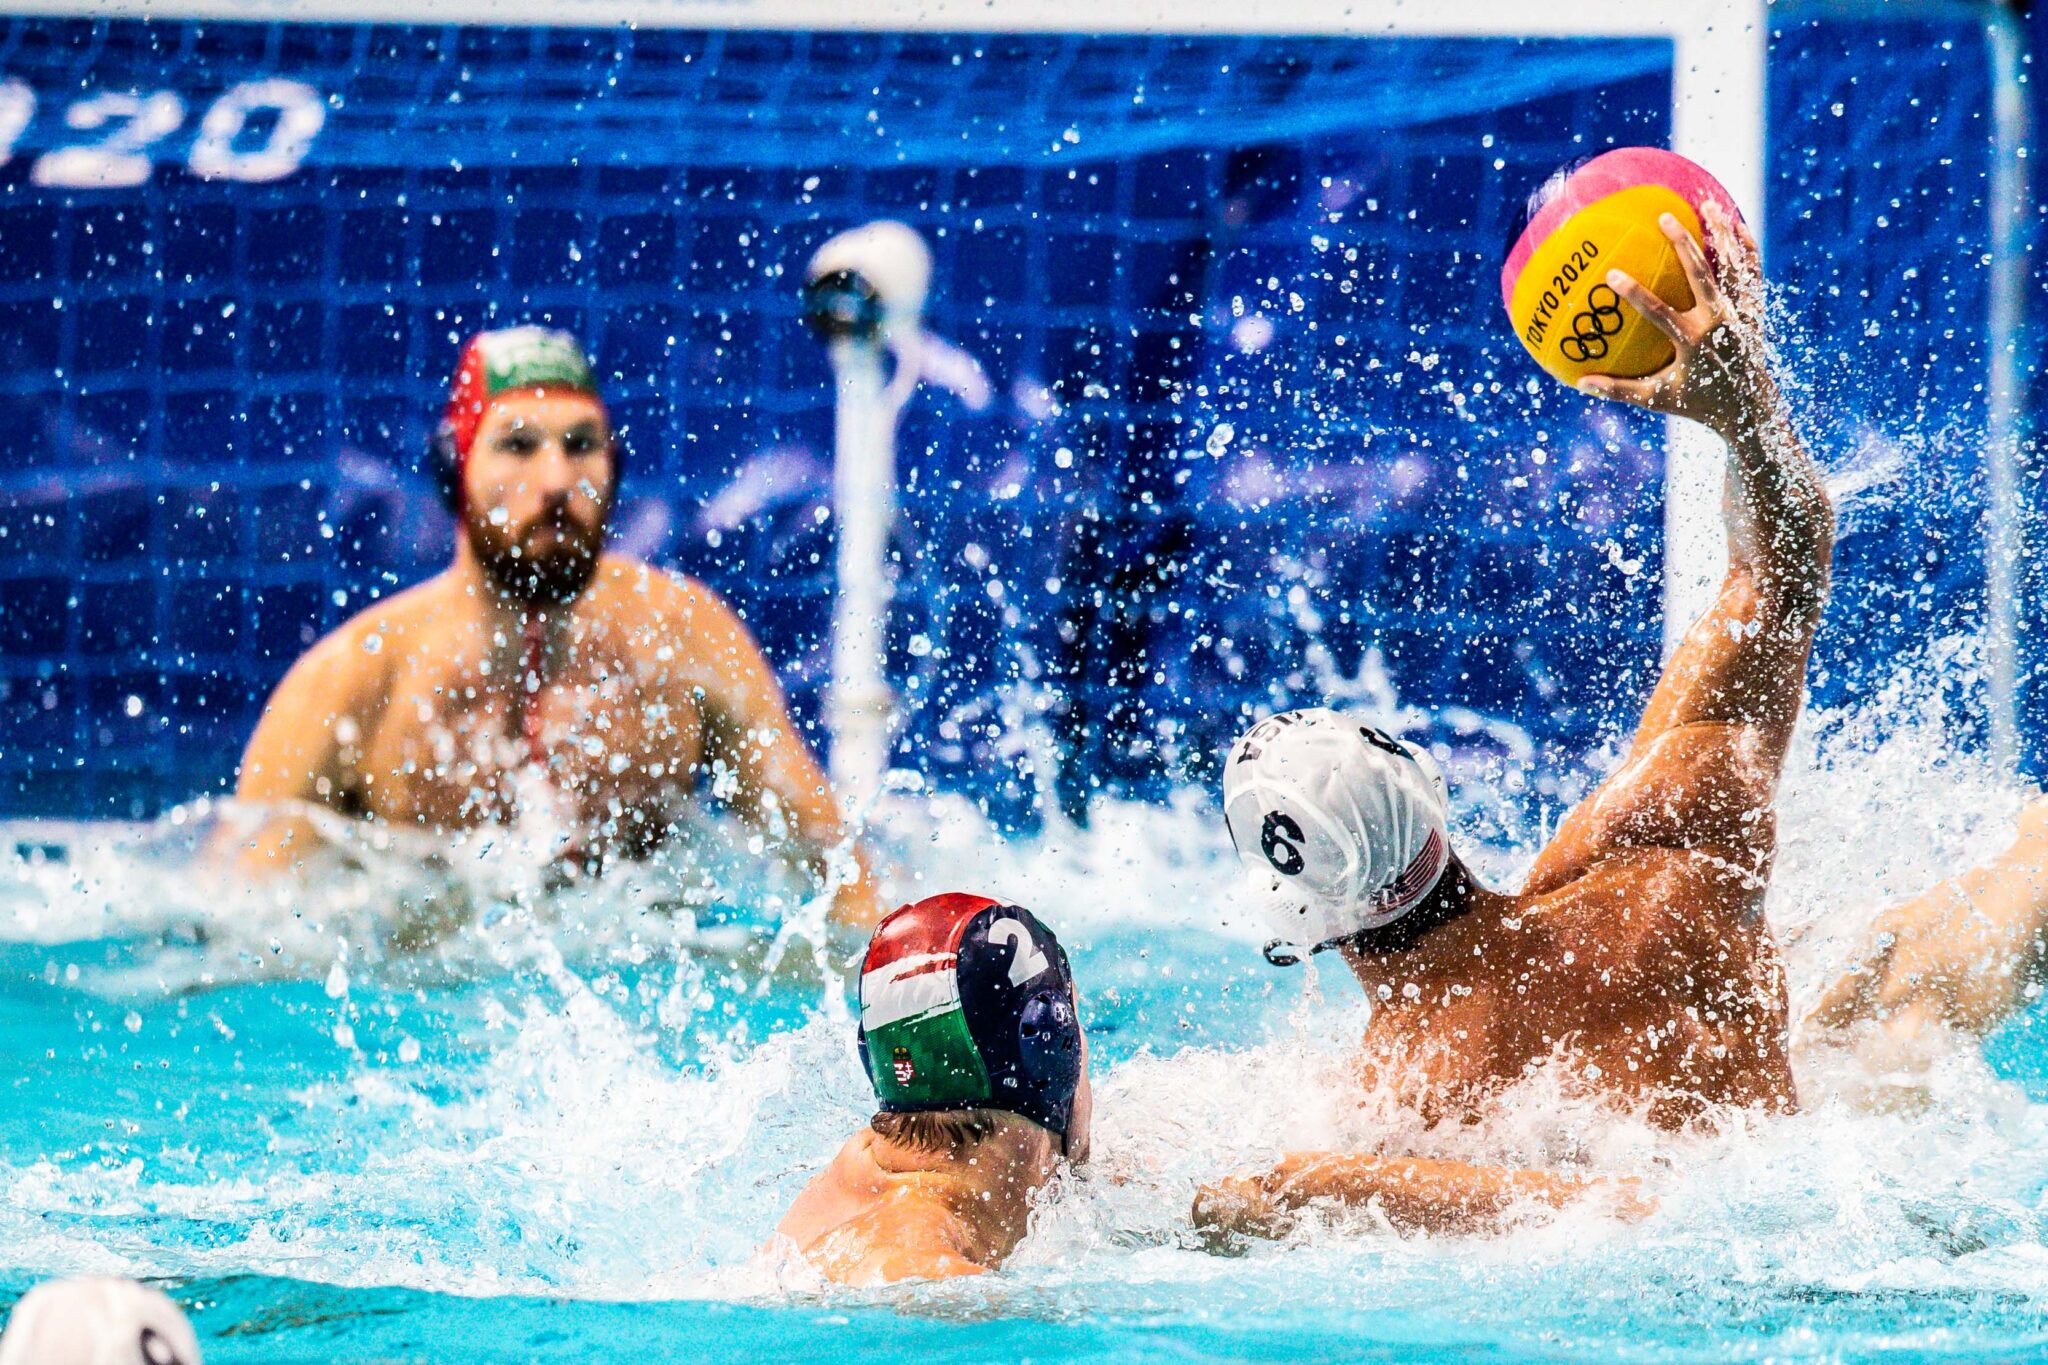 https://swimswam.com/wp-content/uploads/2021/12/Tokyo-2020-Olympic-Water-Polo-By-Jack-Spitser-AC4I7907-scaled.jpg